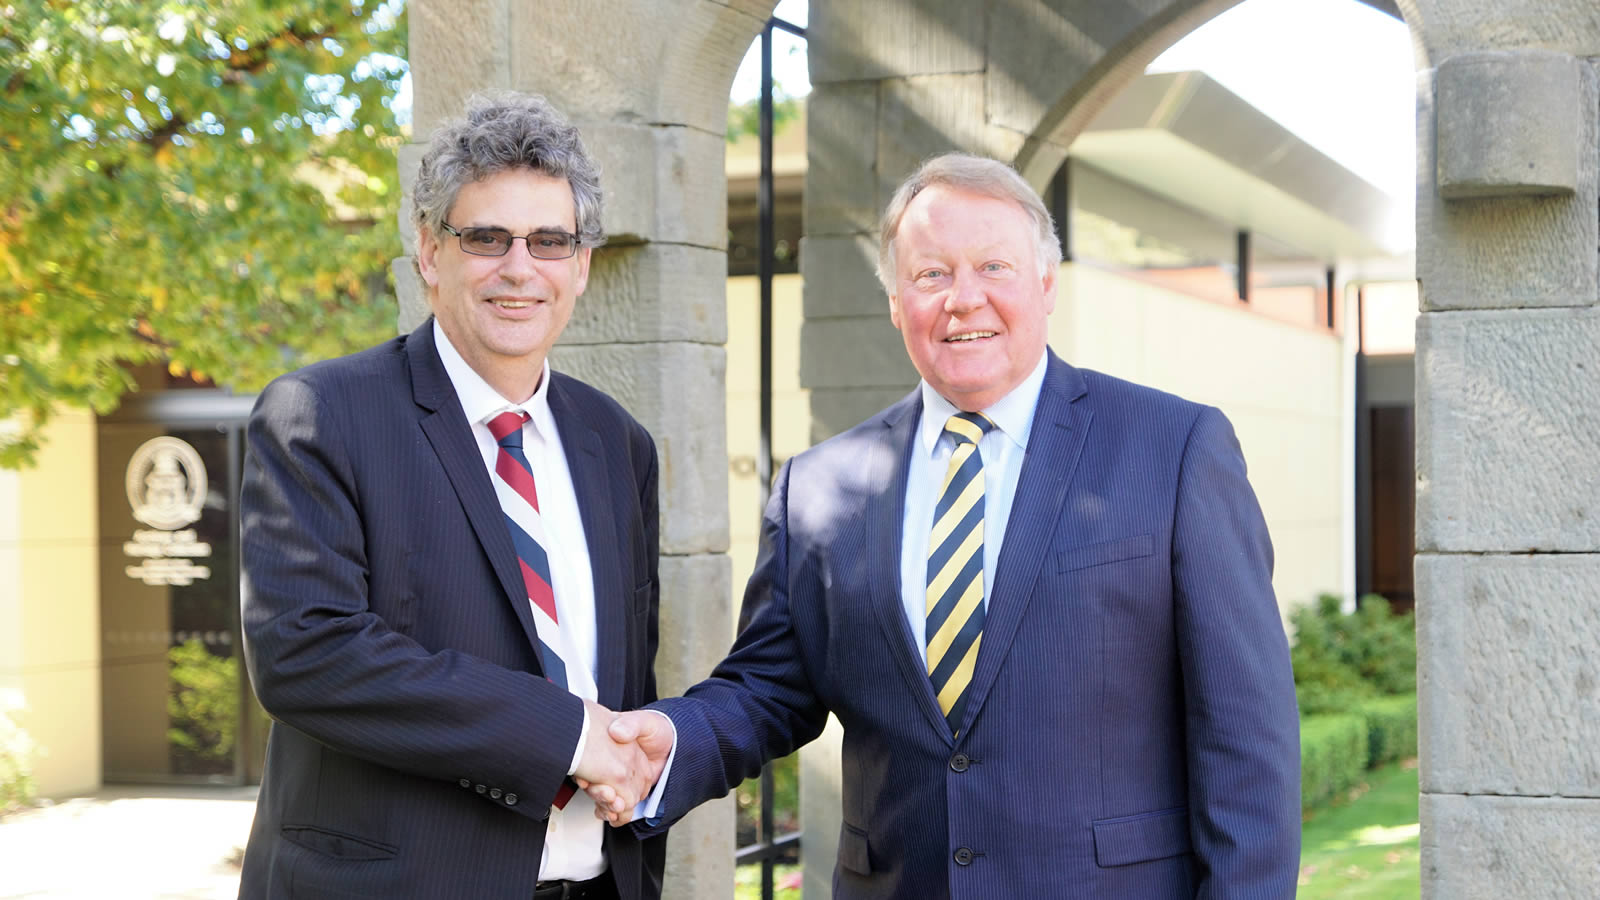 Chairperson of The Hutchins School Board, Professor Marcus Haward congratulates Headmaster, Mr Warwick Dean on the announcement of his retirement (large)